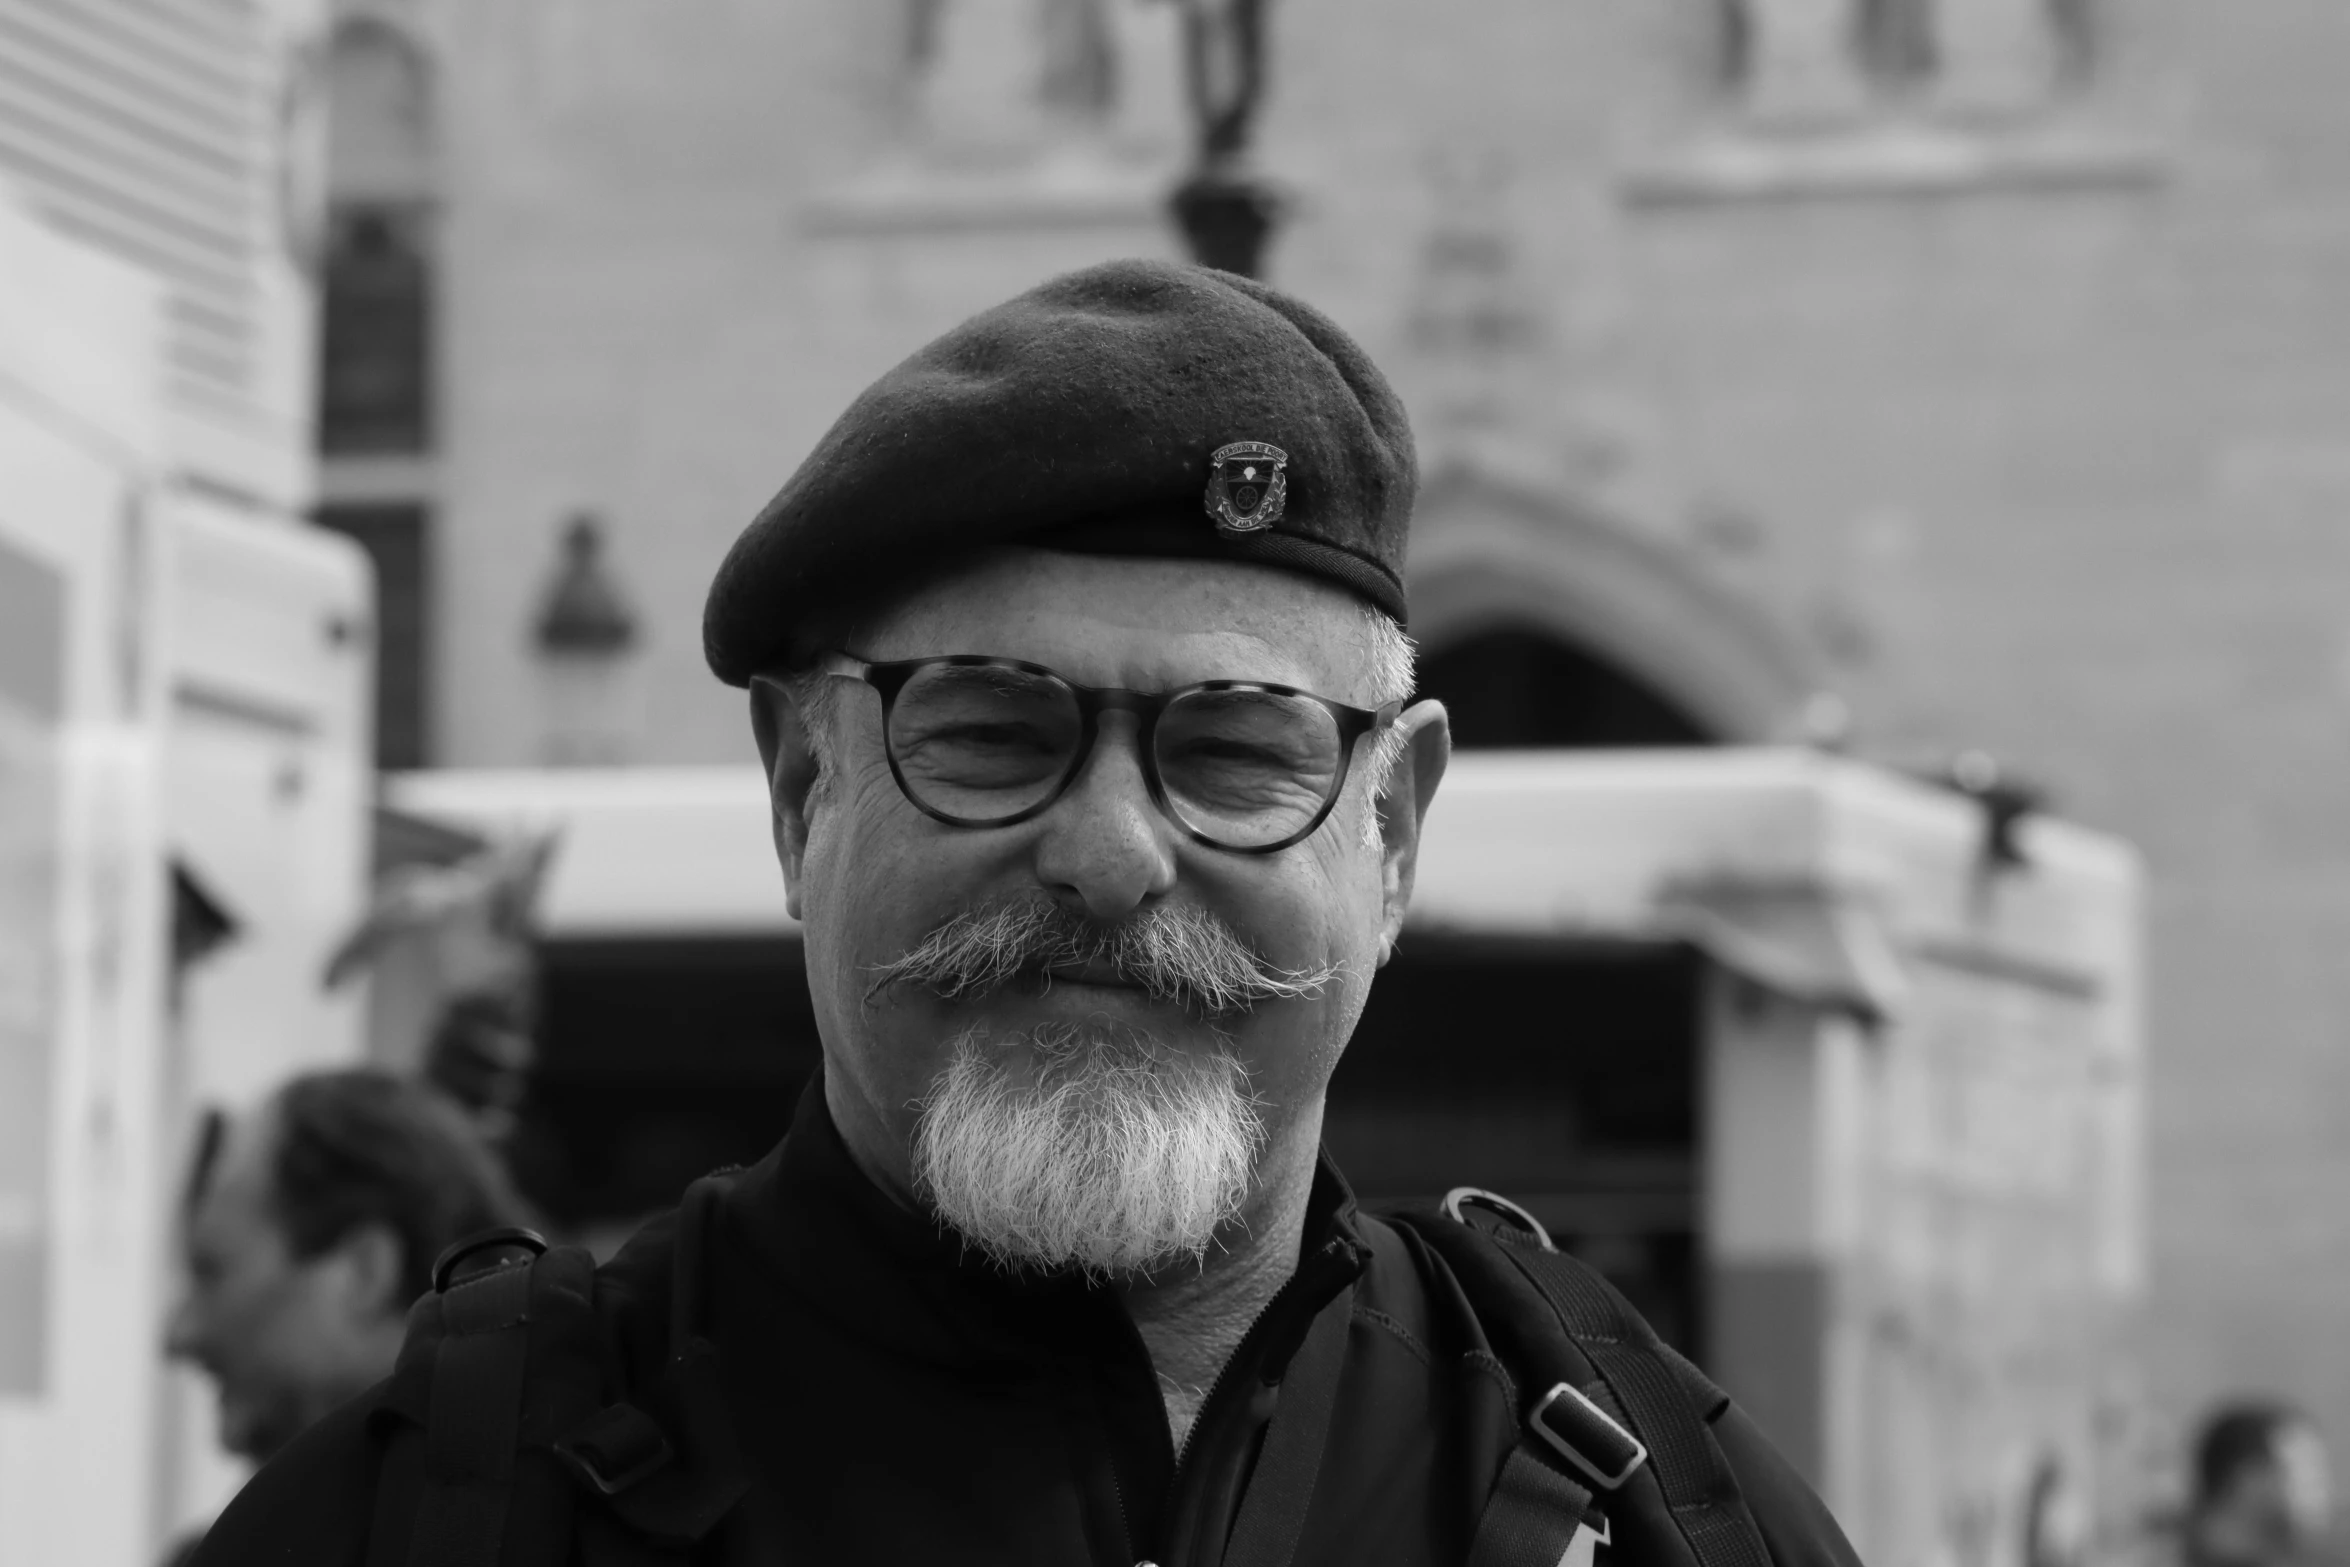 man with white beard and glasses on wearing a hat and a backpack